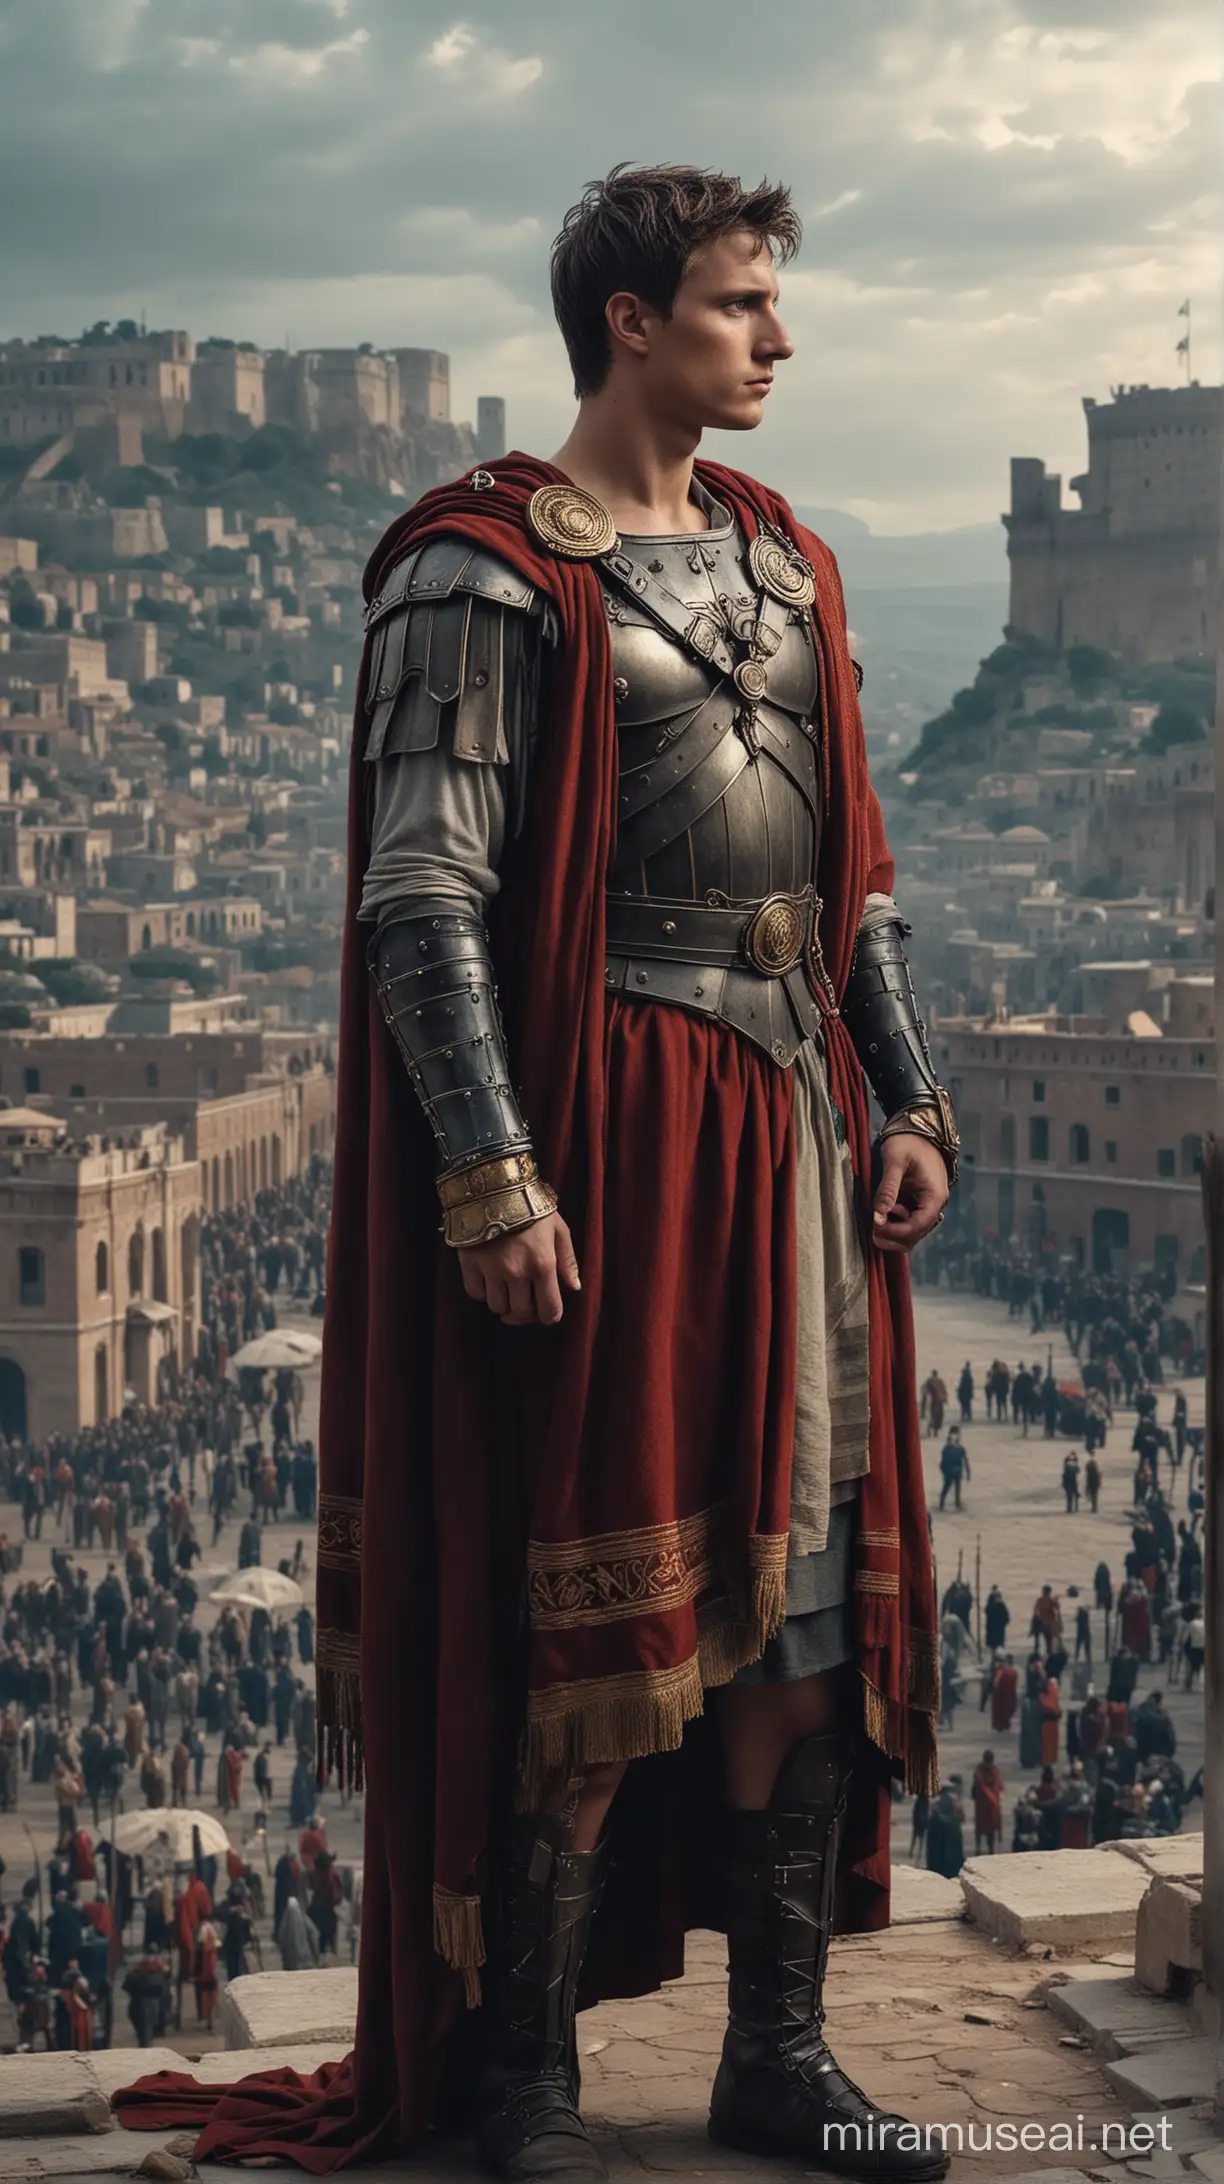 Augustus standing tall in his emperor in moody city in king attire